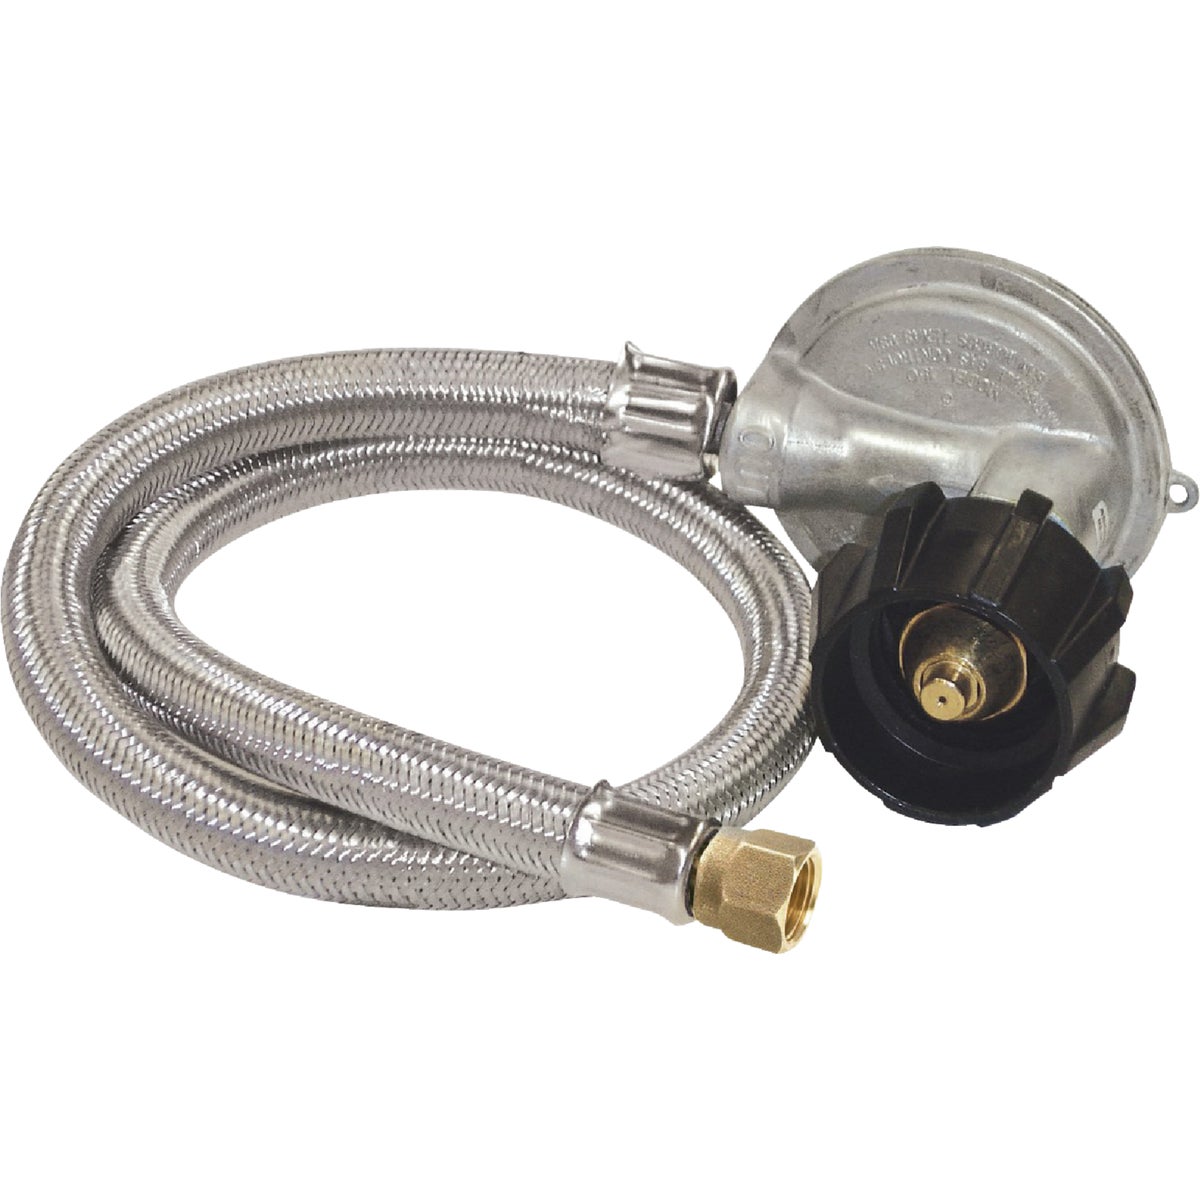 Item 803820, 3 Ft. stainless braided hose with .5 psi preset regulator.